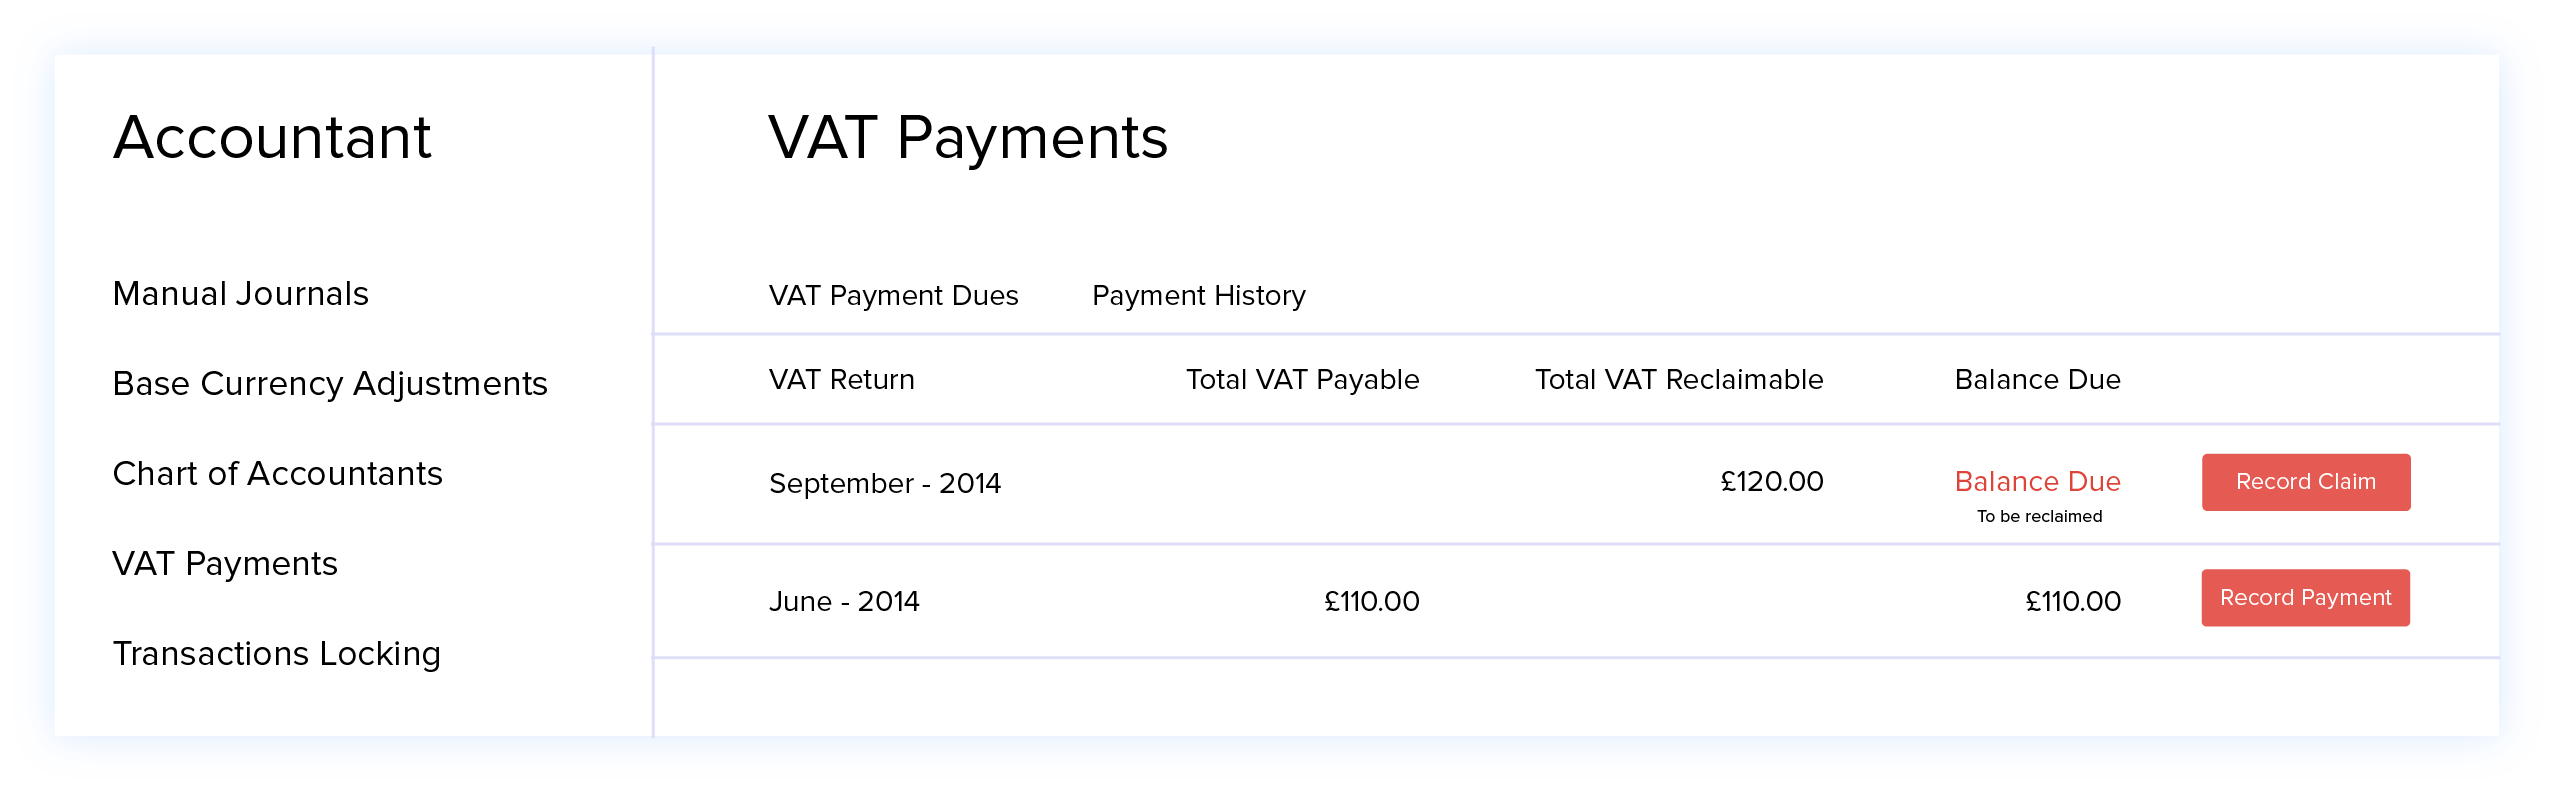 VAT Payments - VAT Accounting Software | Zoho Books